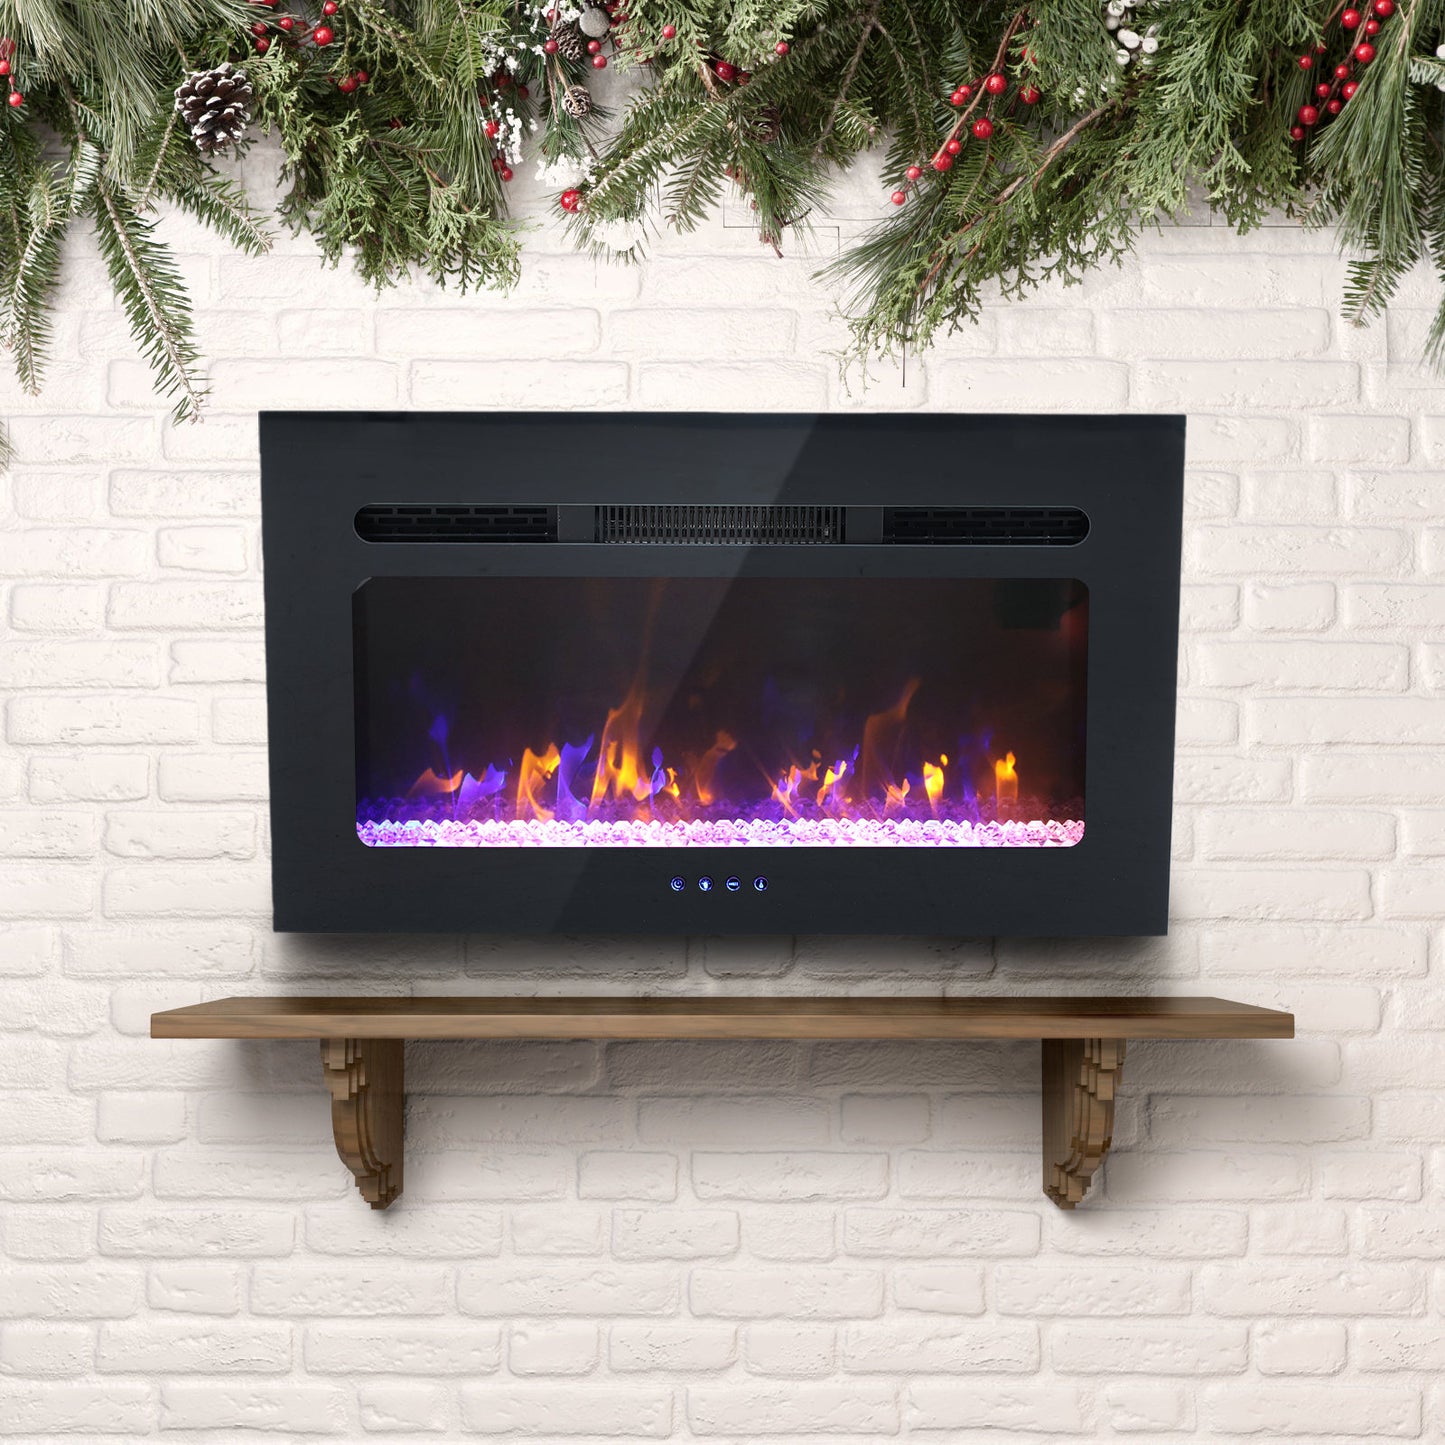 Sophia & William 30 inches Electric Fireplace Recessed & Wall Mounted Heater